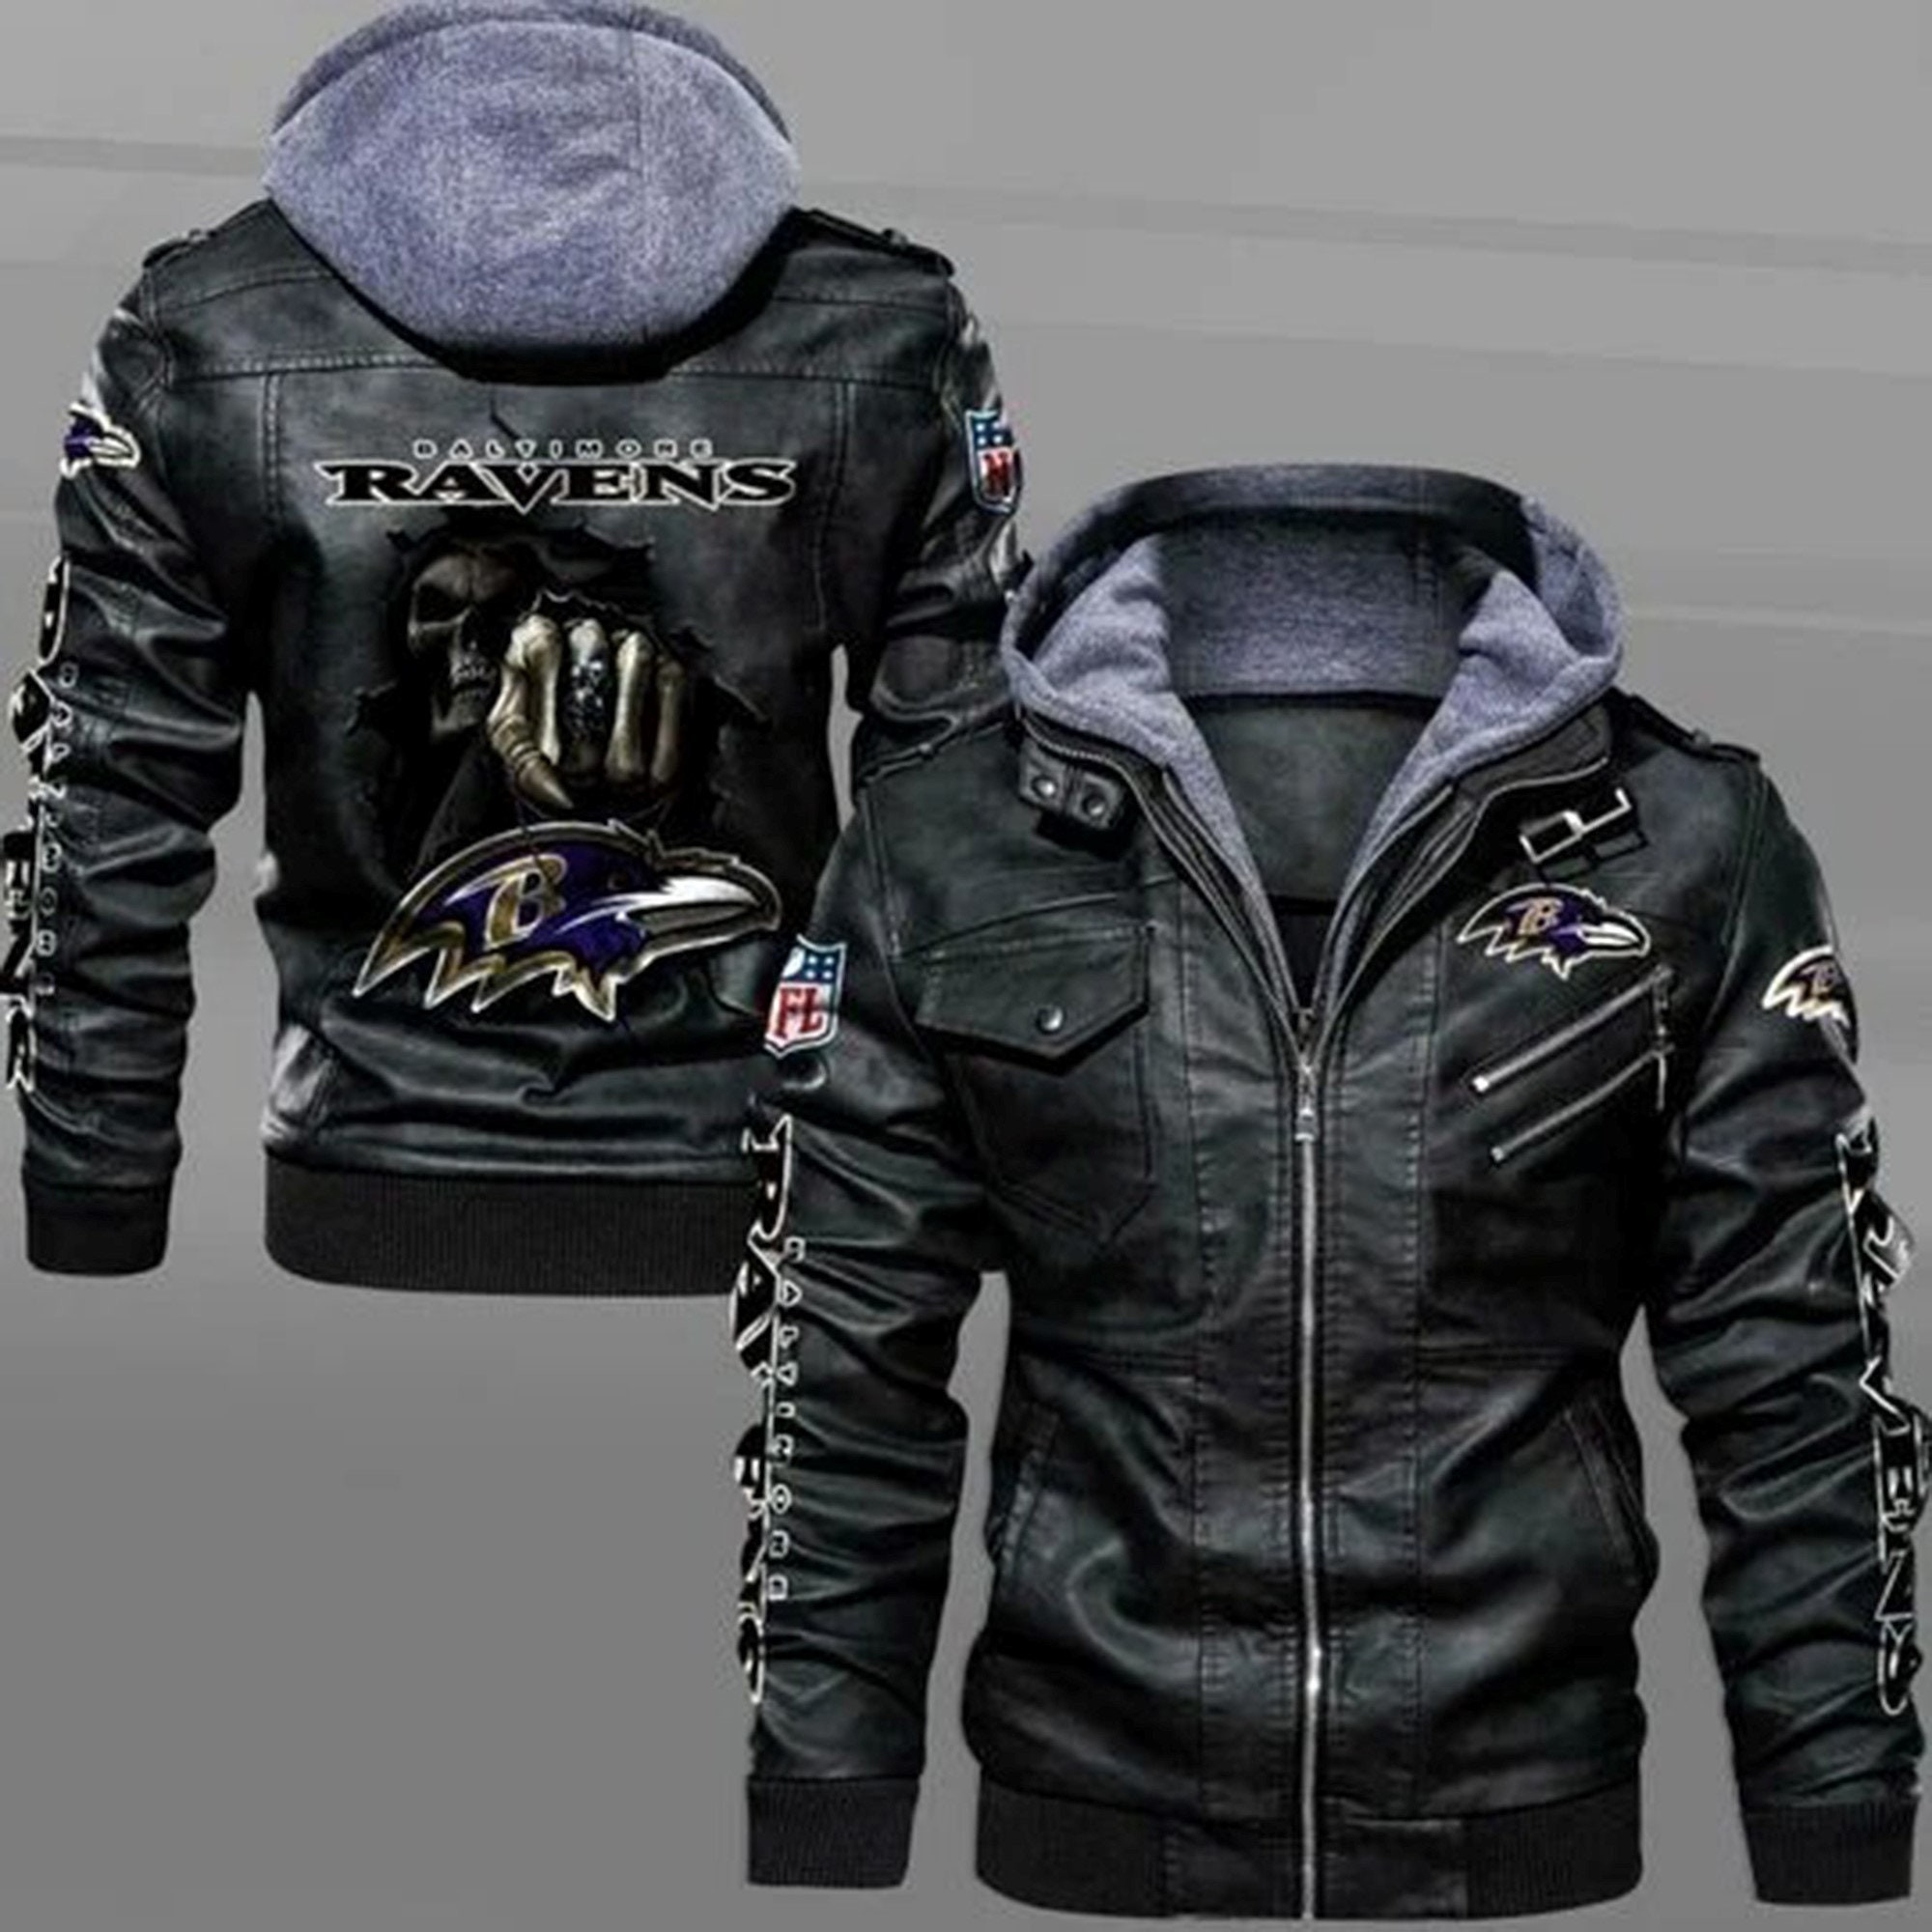 These Amazing Leather Jacket will add to the appeal of your outfit 113